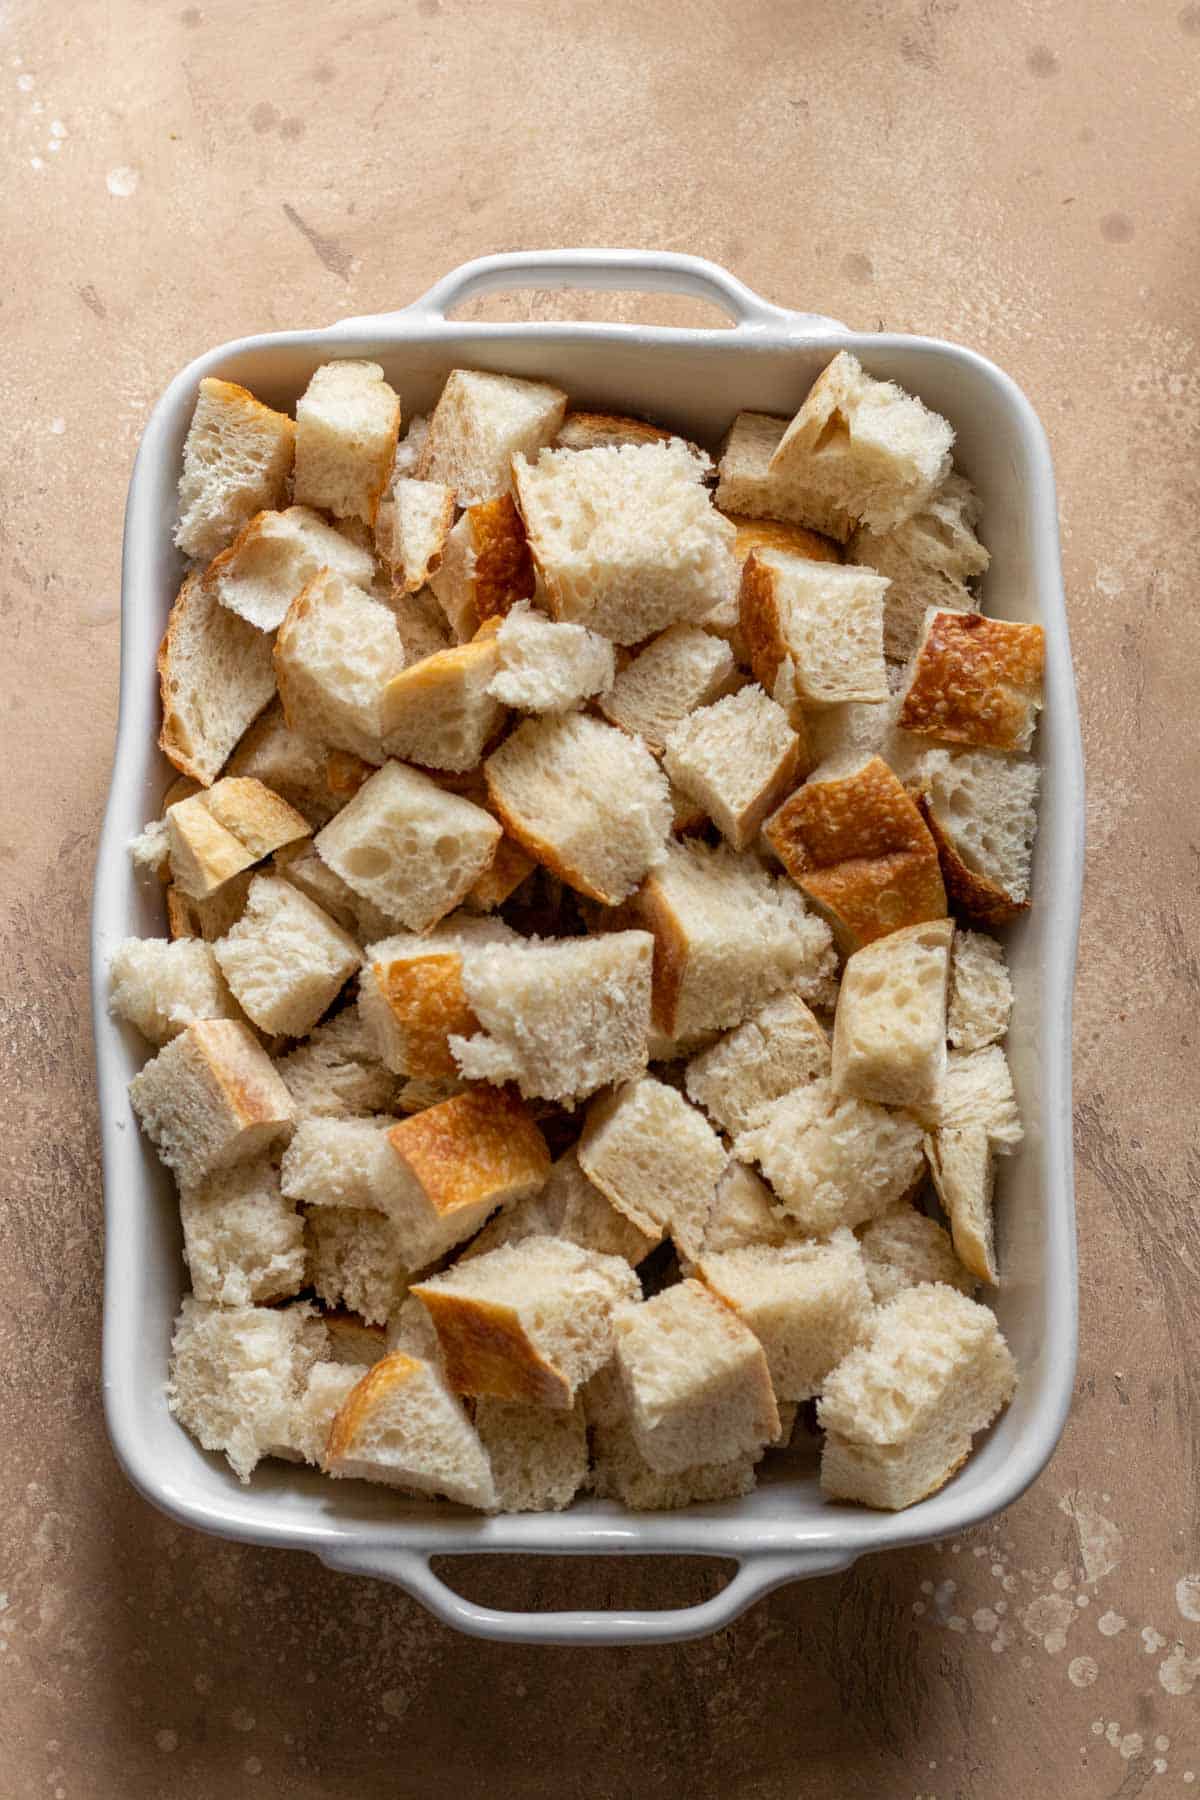 Cubed french bread in a greased casserole dish.